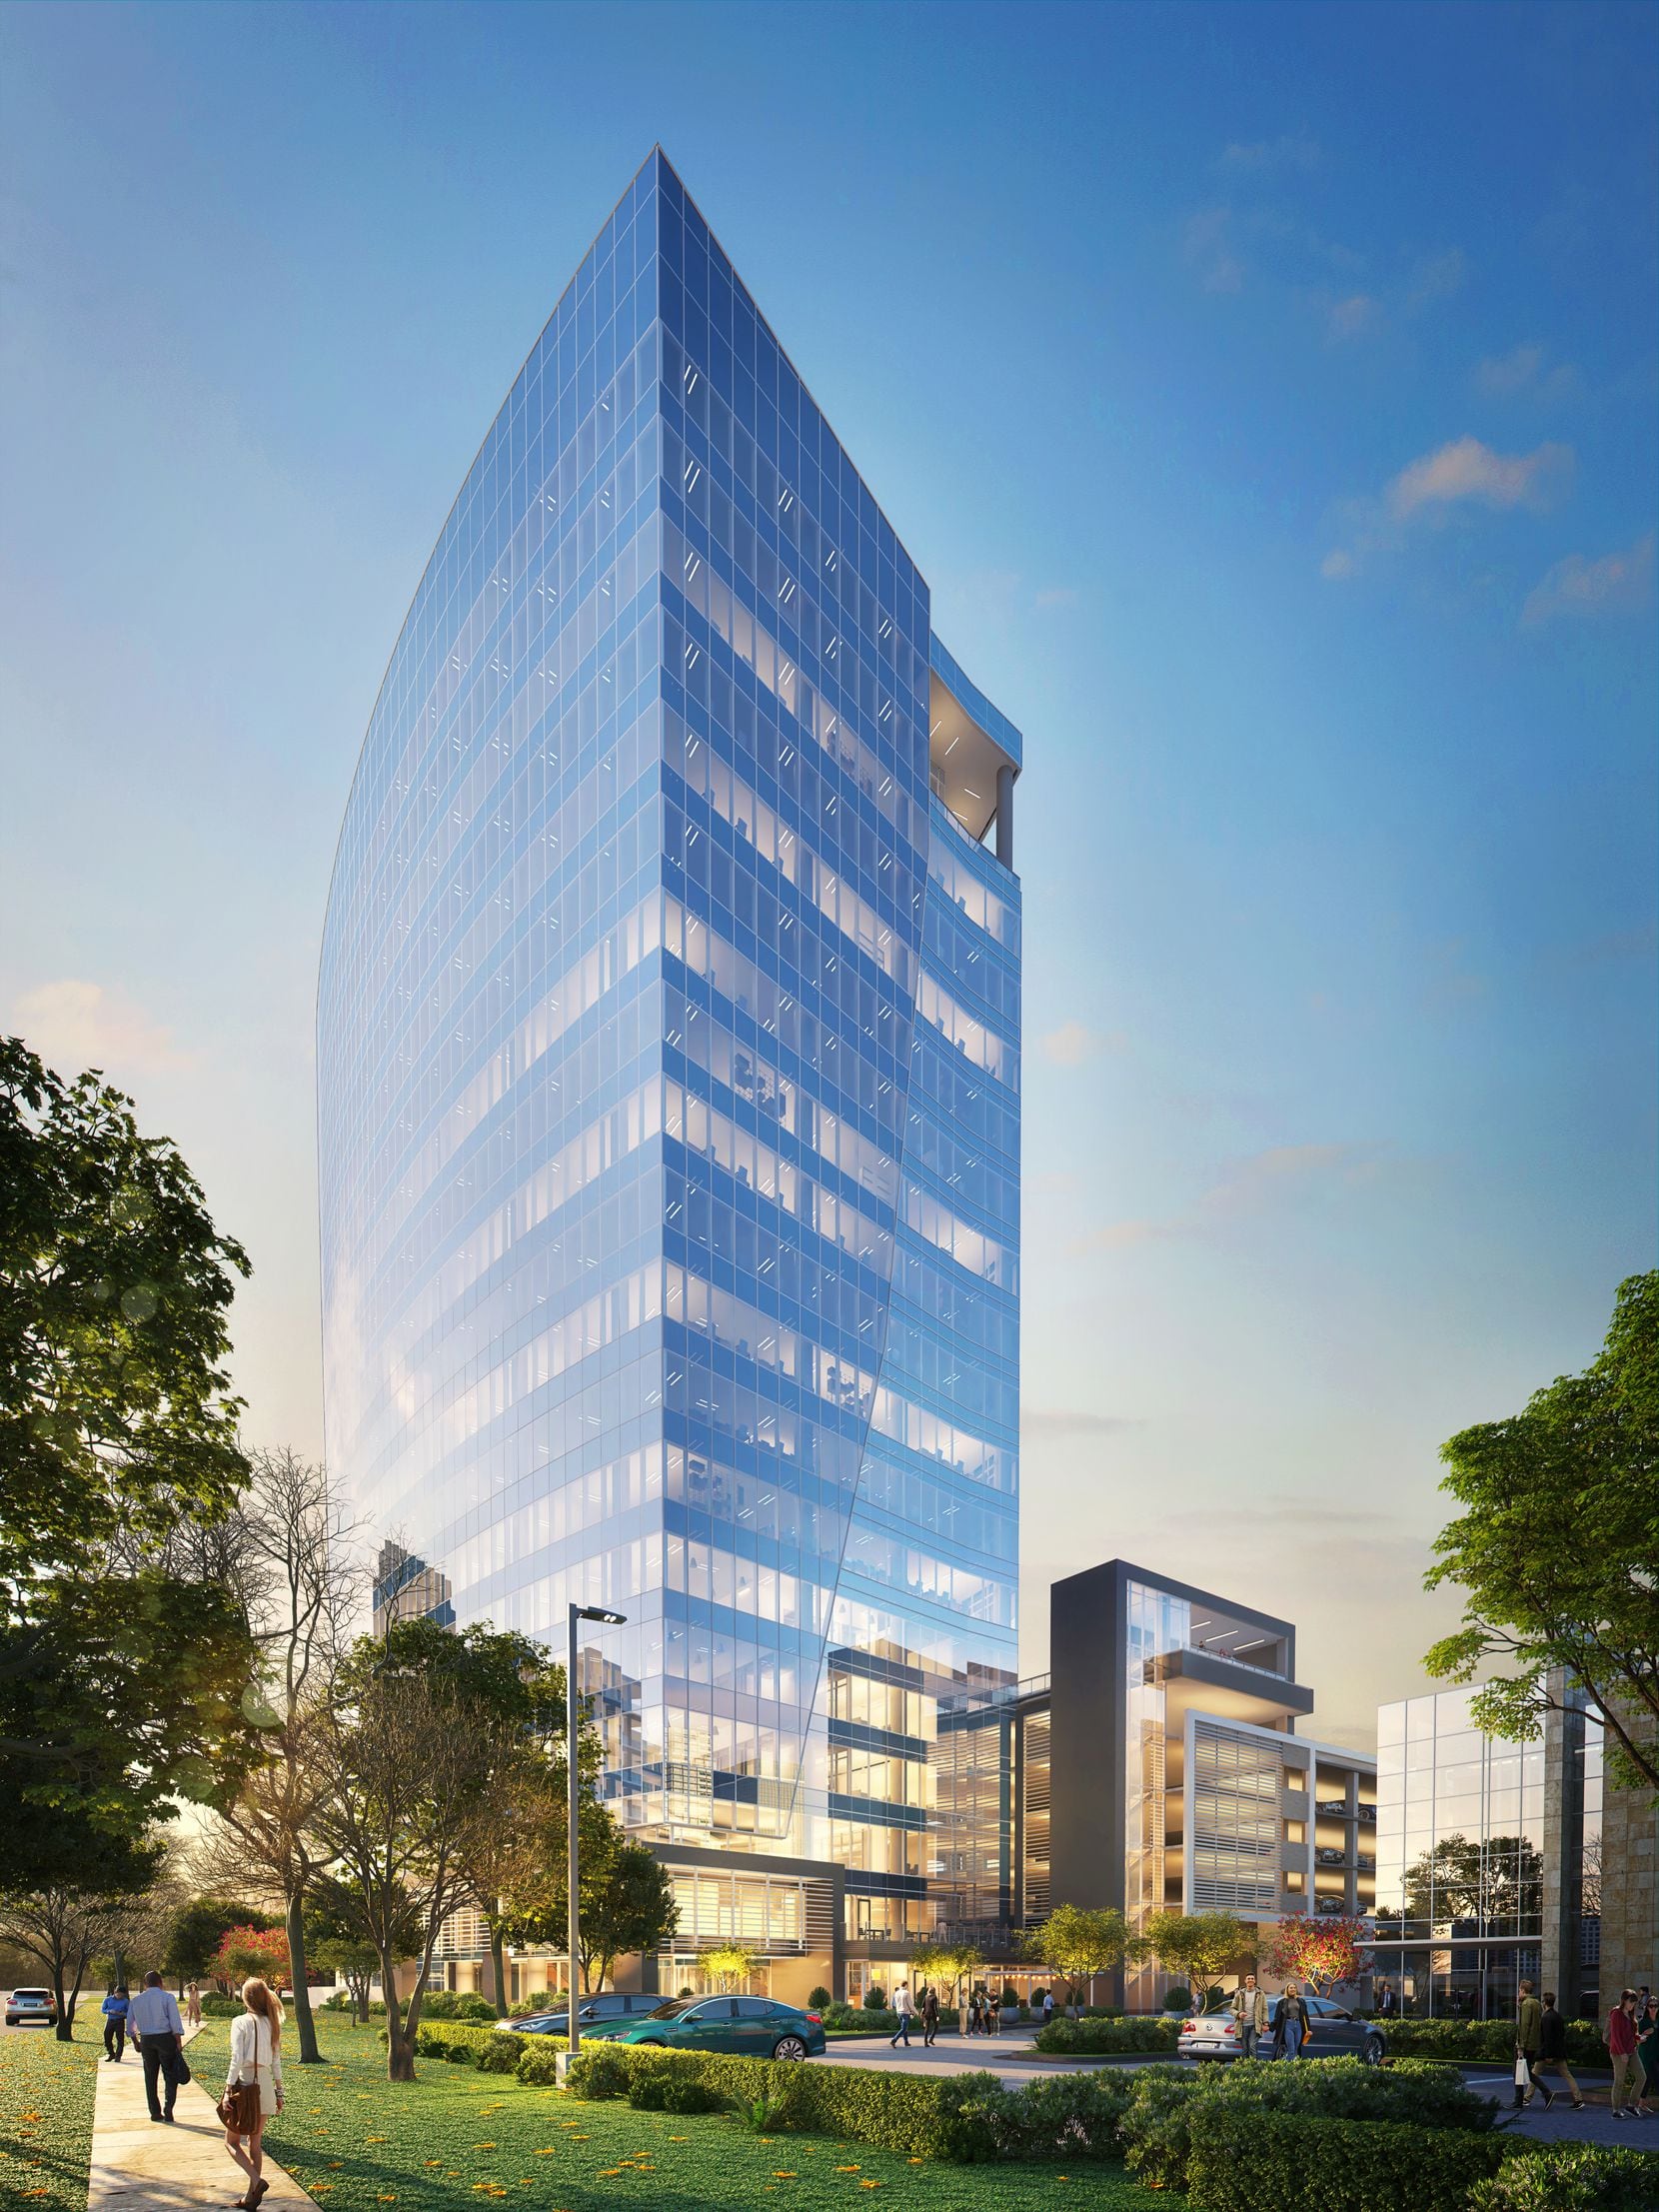 Developer Granite Properties has started construction on a 19-story office tower on S.H. 121 in Plano. The Granite Park Six tower is the largest such project started in Plano in almost two years.